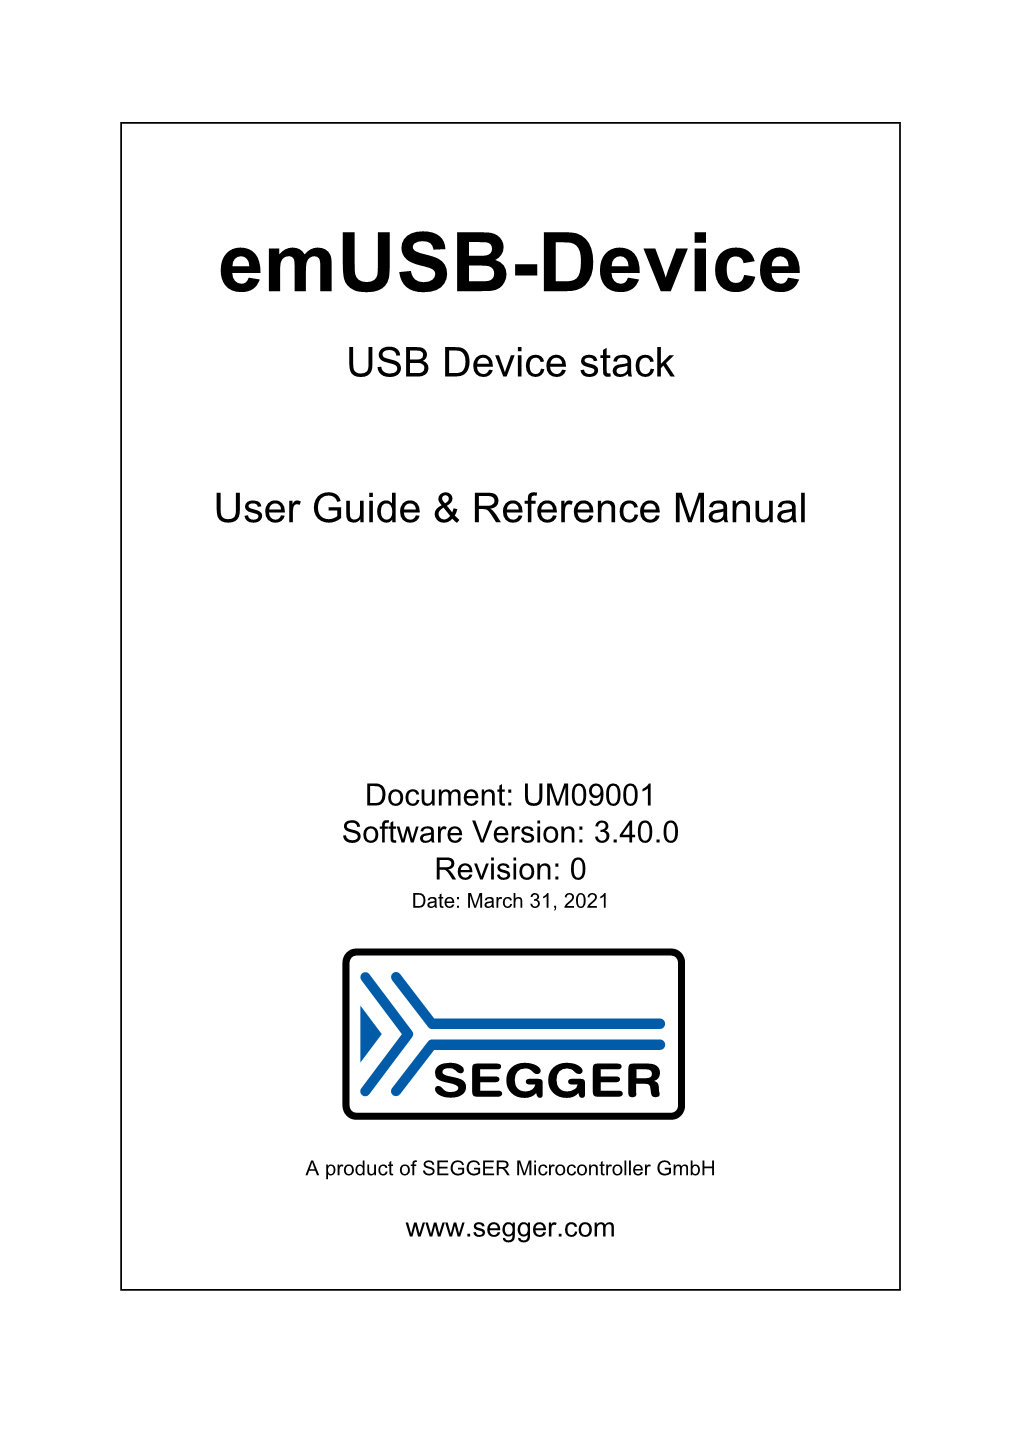 Emusb-Device User Guide & Reference Manual